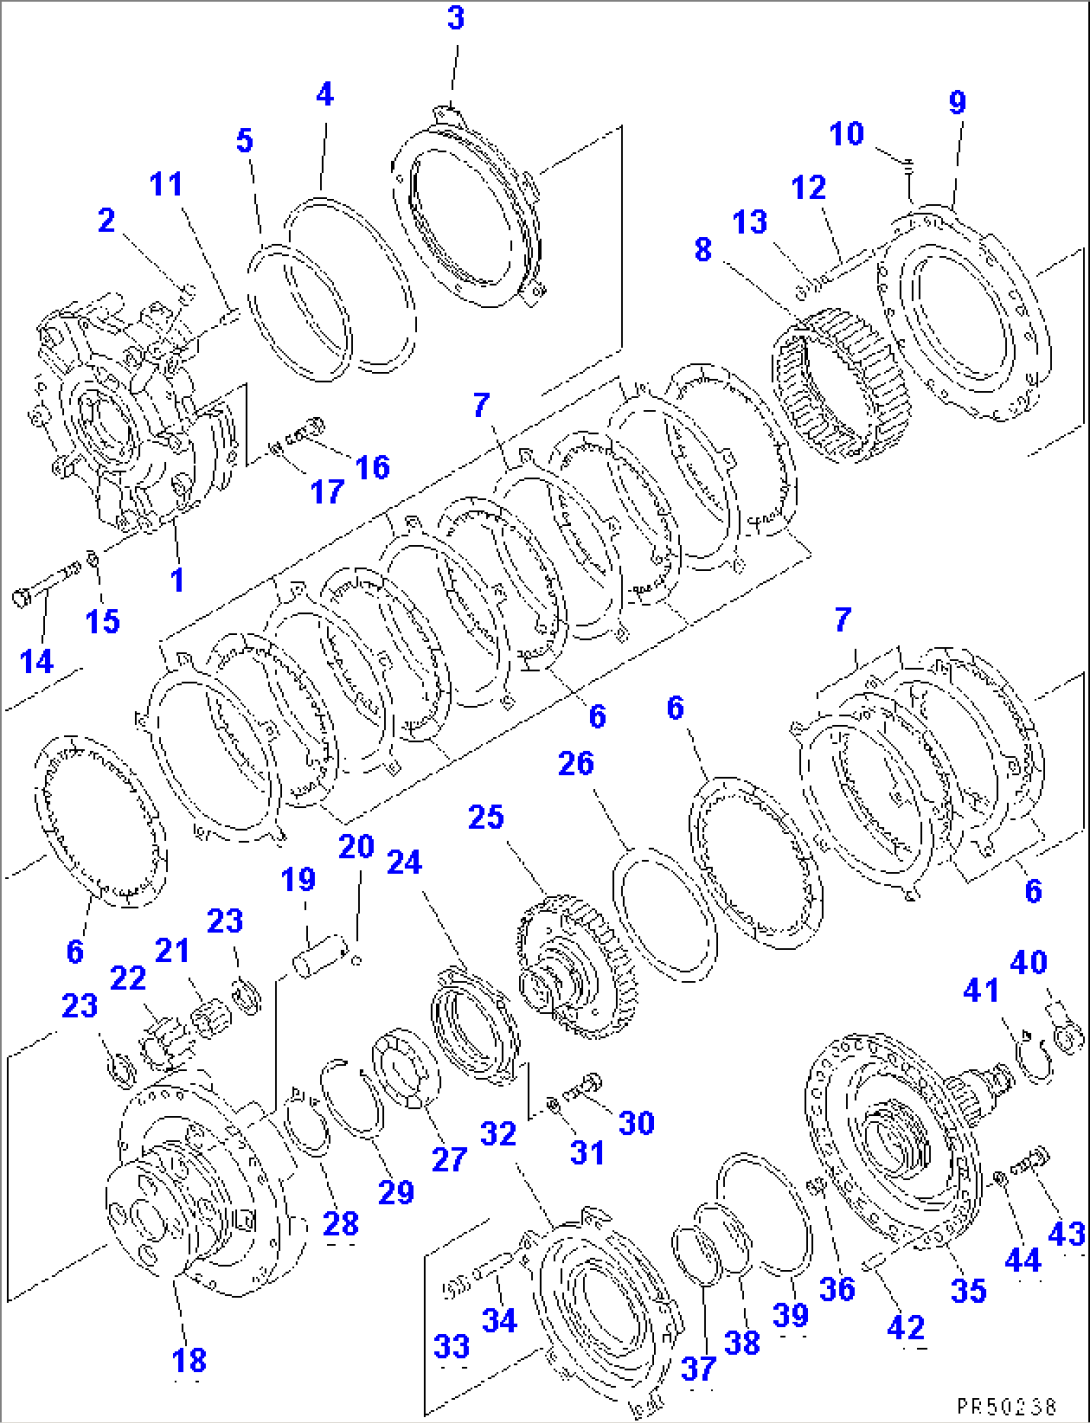 TRANSMISSION (LOW AND HIGH CLUTCH)(#10001-.)